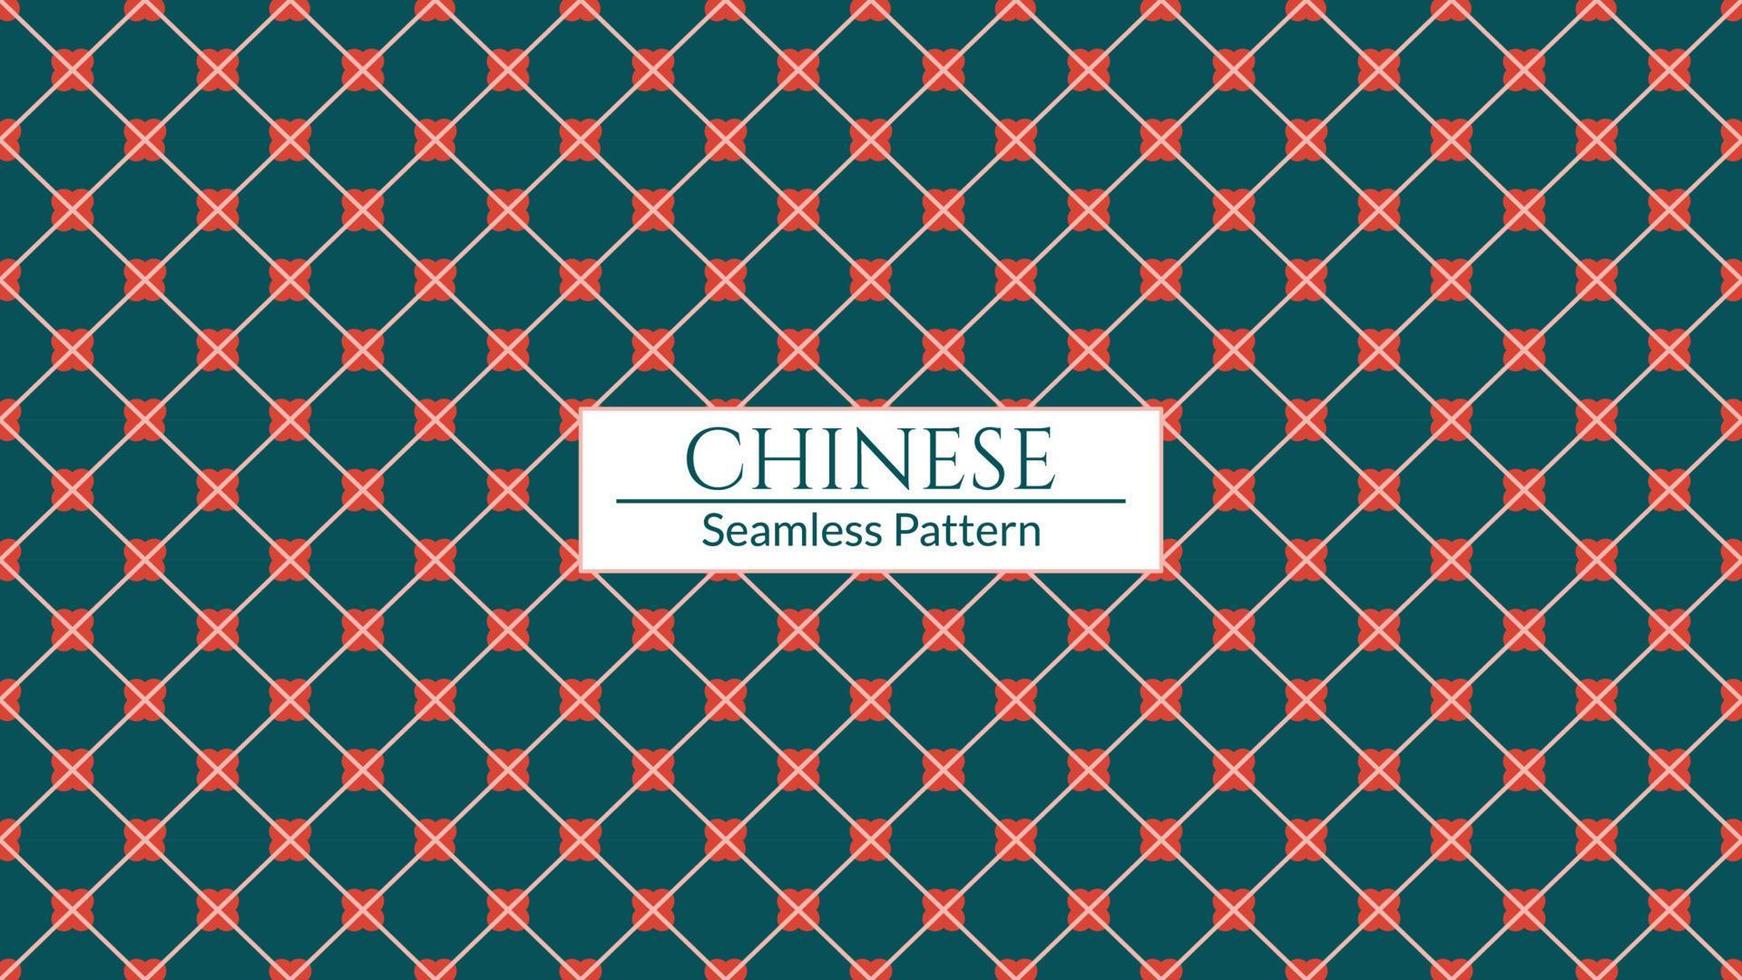 Chinese seamless pattern, Abstract background, Decorative wallpaper. Vector illustration